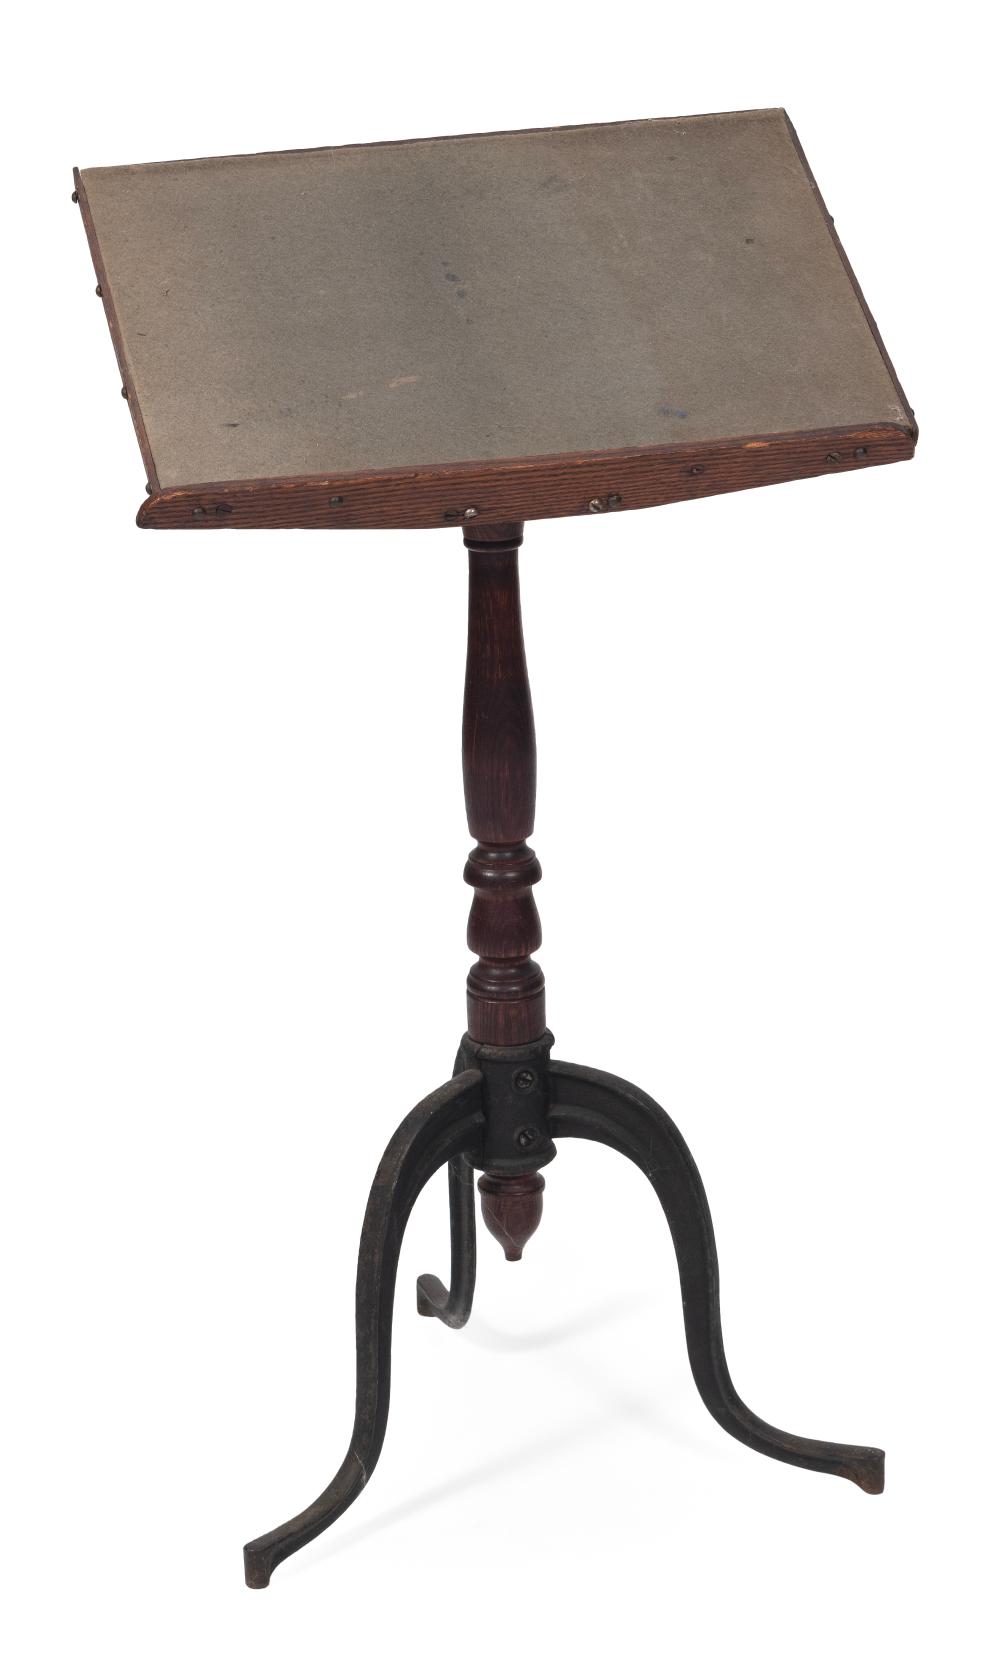 IRON AND WOOD BOOK STAND LATE 19TH